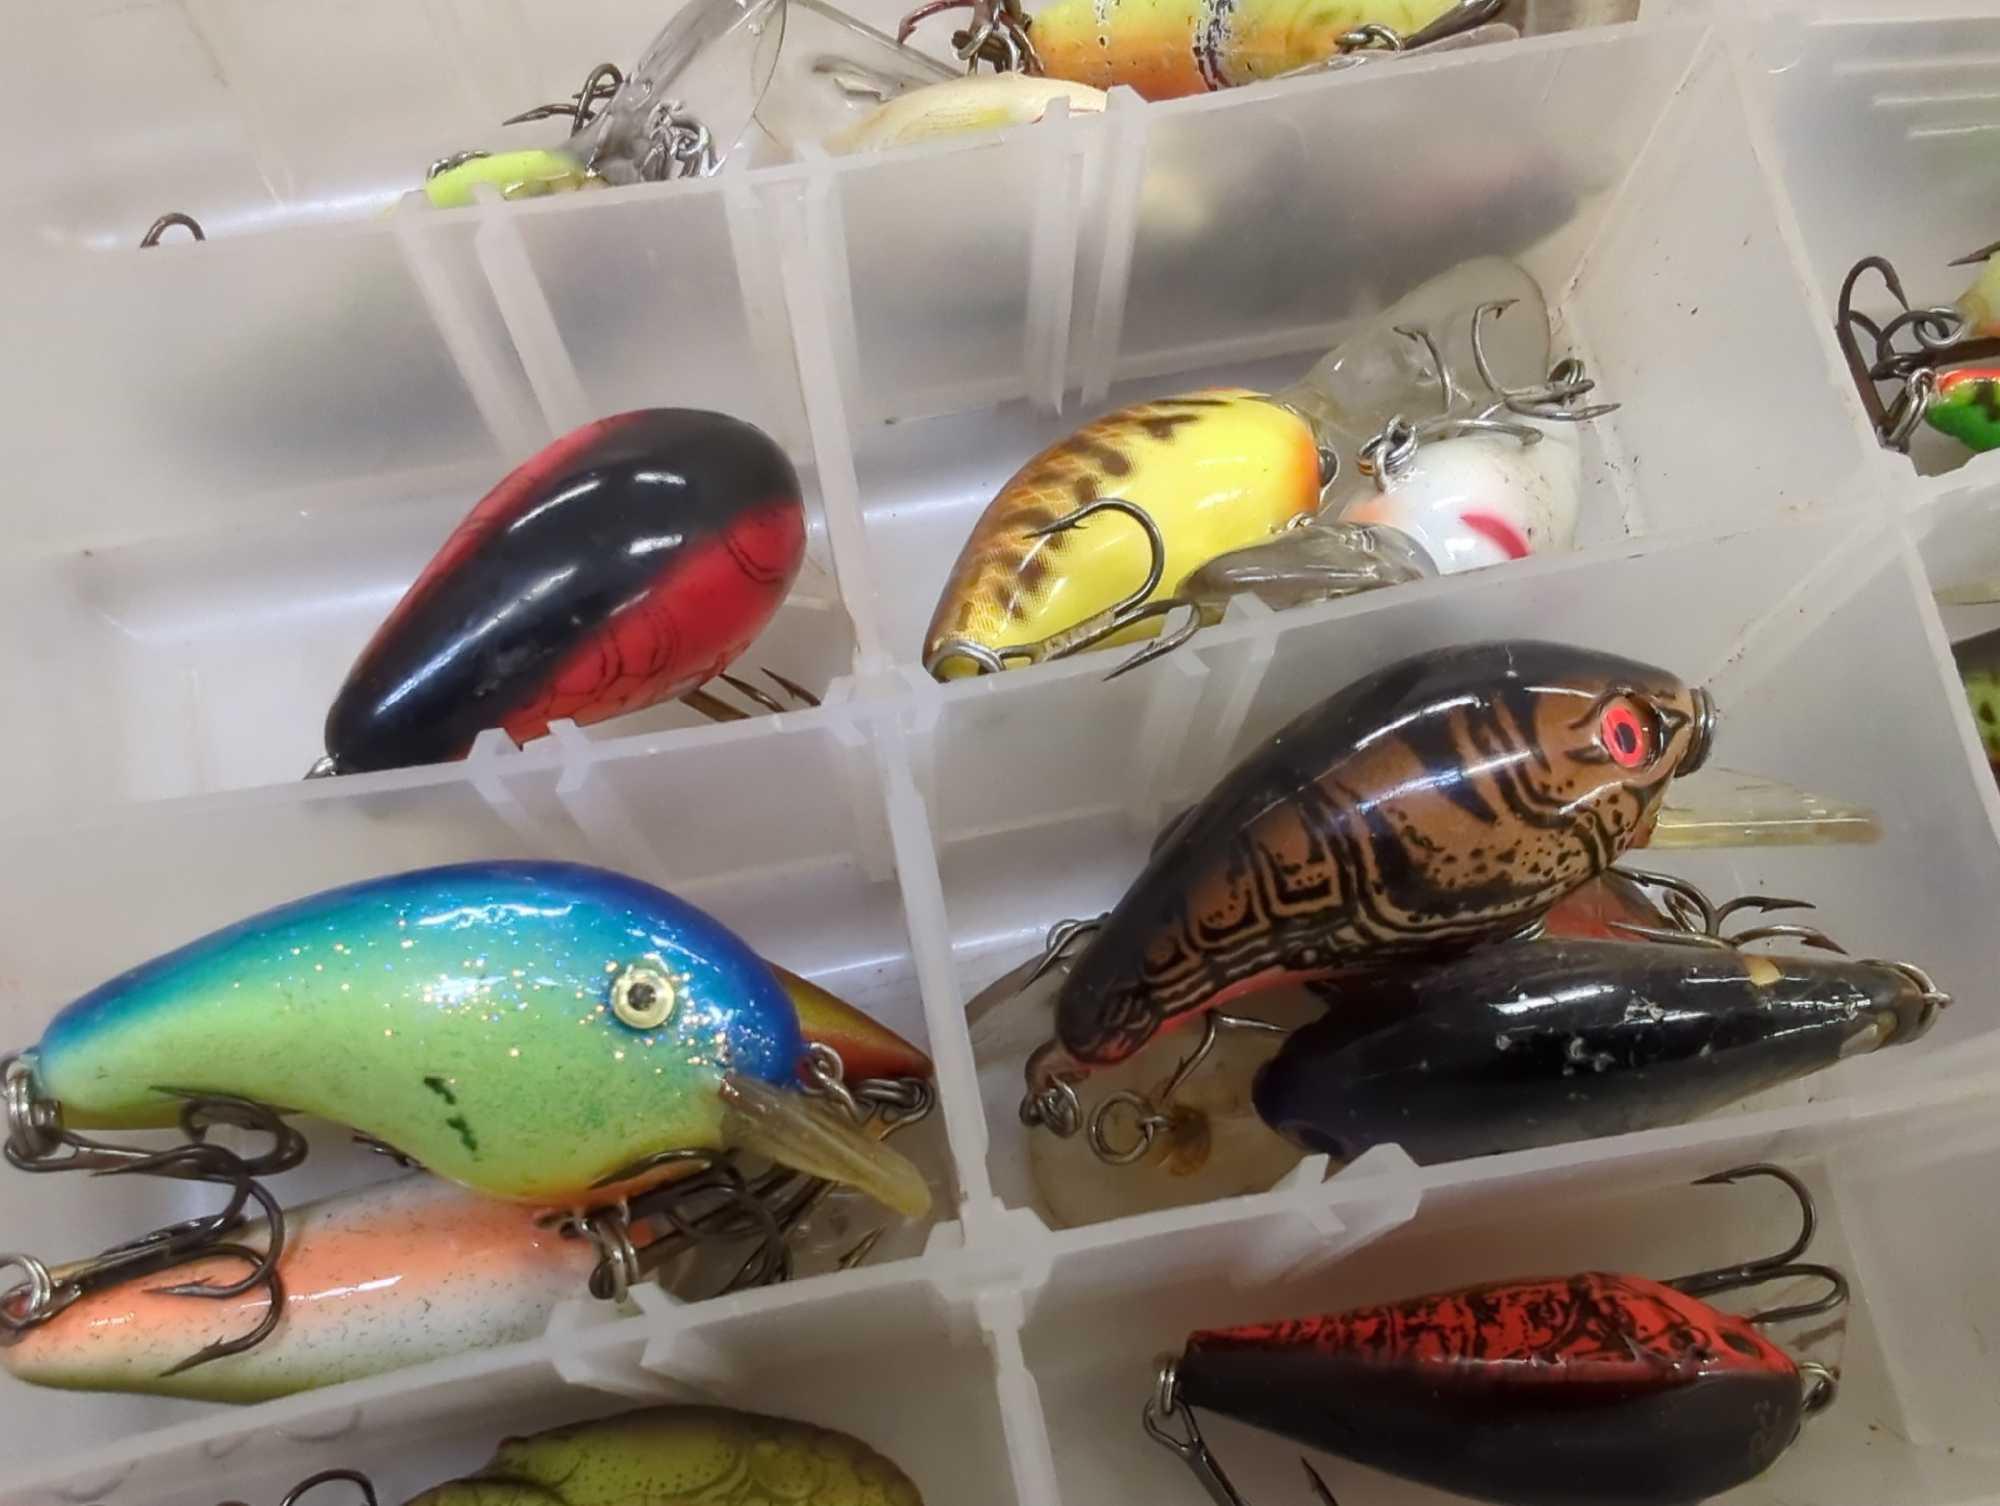 Tackle Box and contents includes fishing lures of similar style. Comes as is shown in photos.